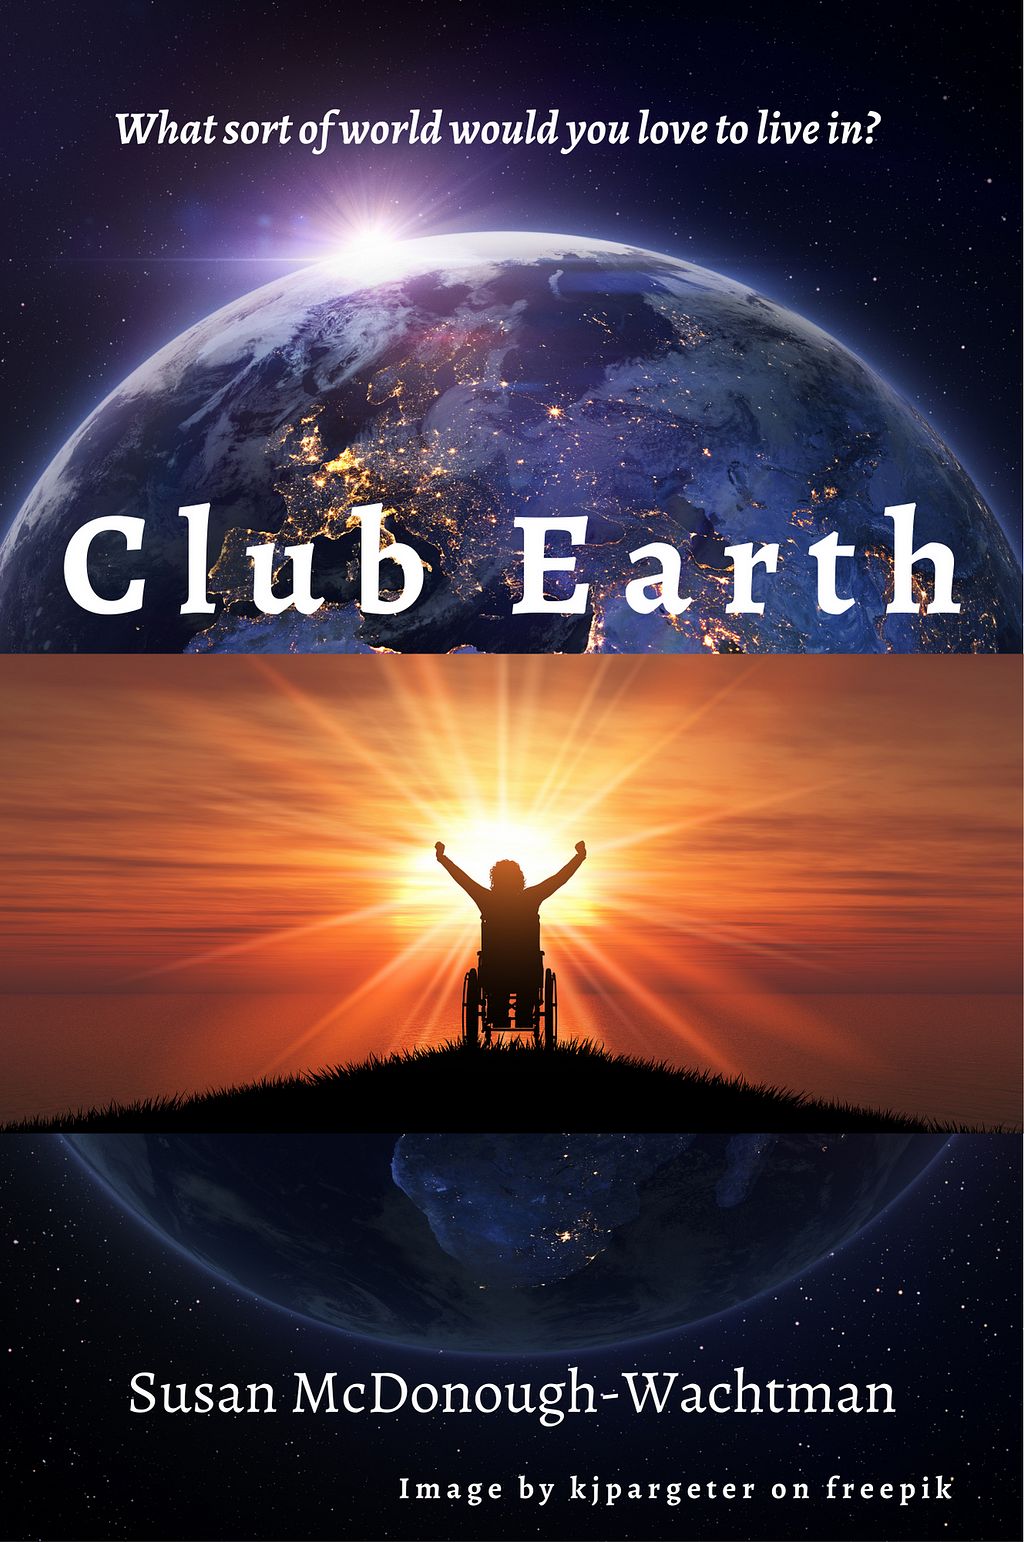 A photo of the earth with a superimposed sunrise. A silhouette of a person in a wheelchair is holding their arms up in triumph in the center. It says: Club Earth in the middle. At the top, it says: What sort of world would you love to live in? At the bottom: Susan McDonough Wachtman, image by kjpargeter on freepik.